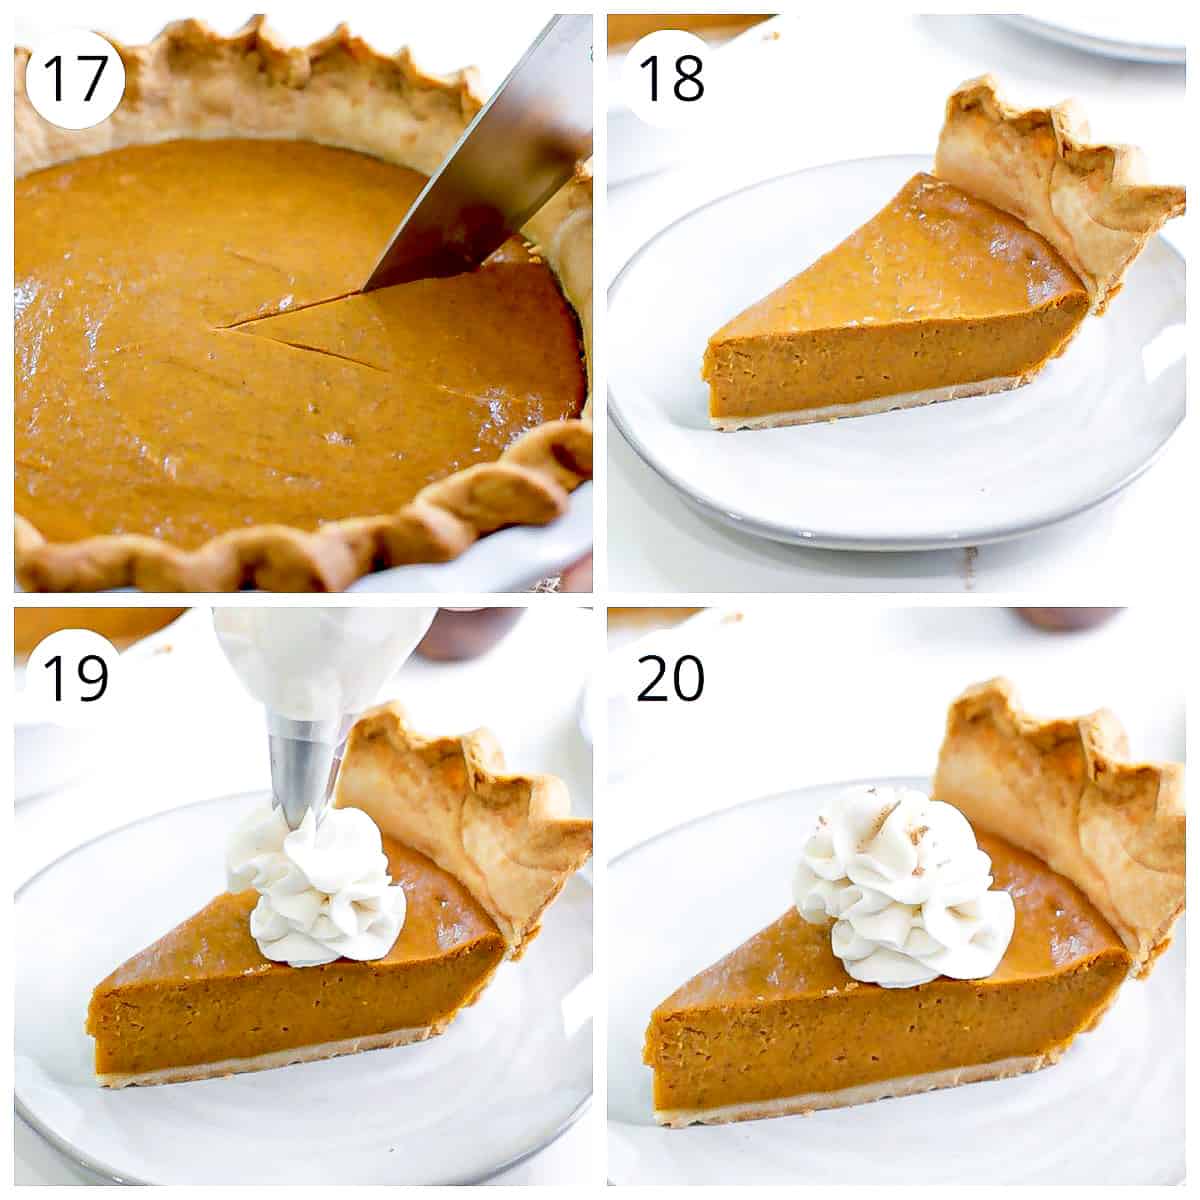 Steps for slicing and serving pumpkin pie with whipped cream frosting